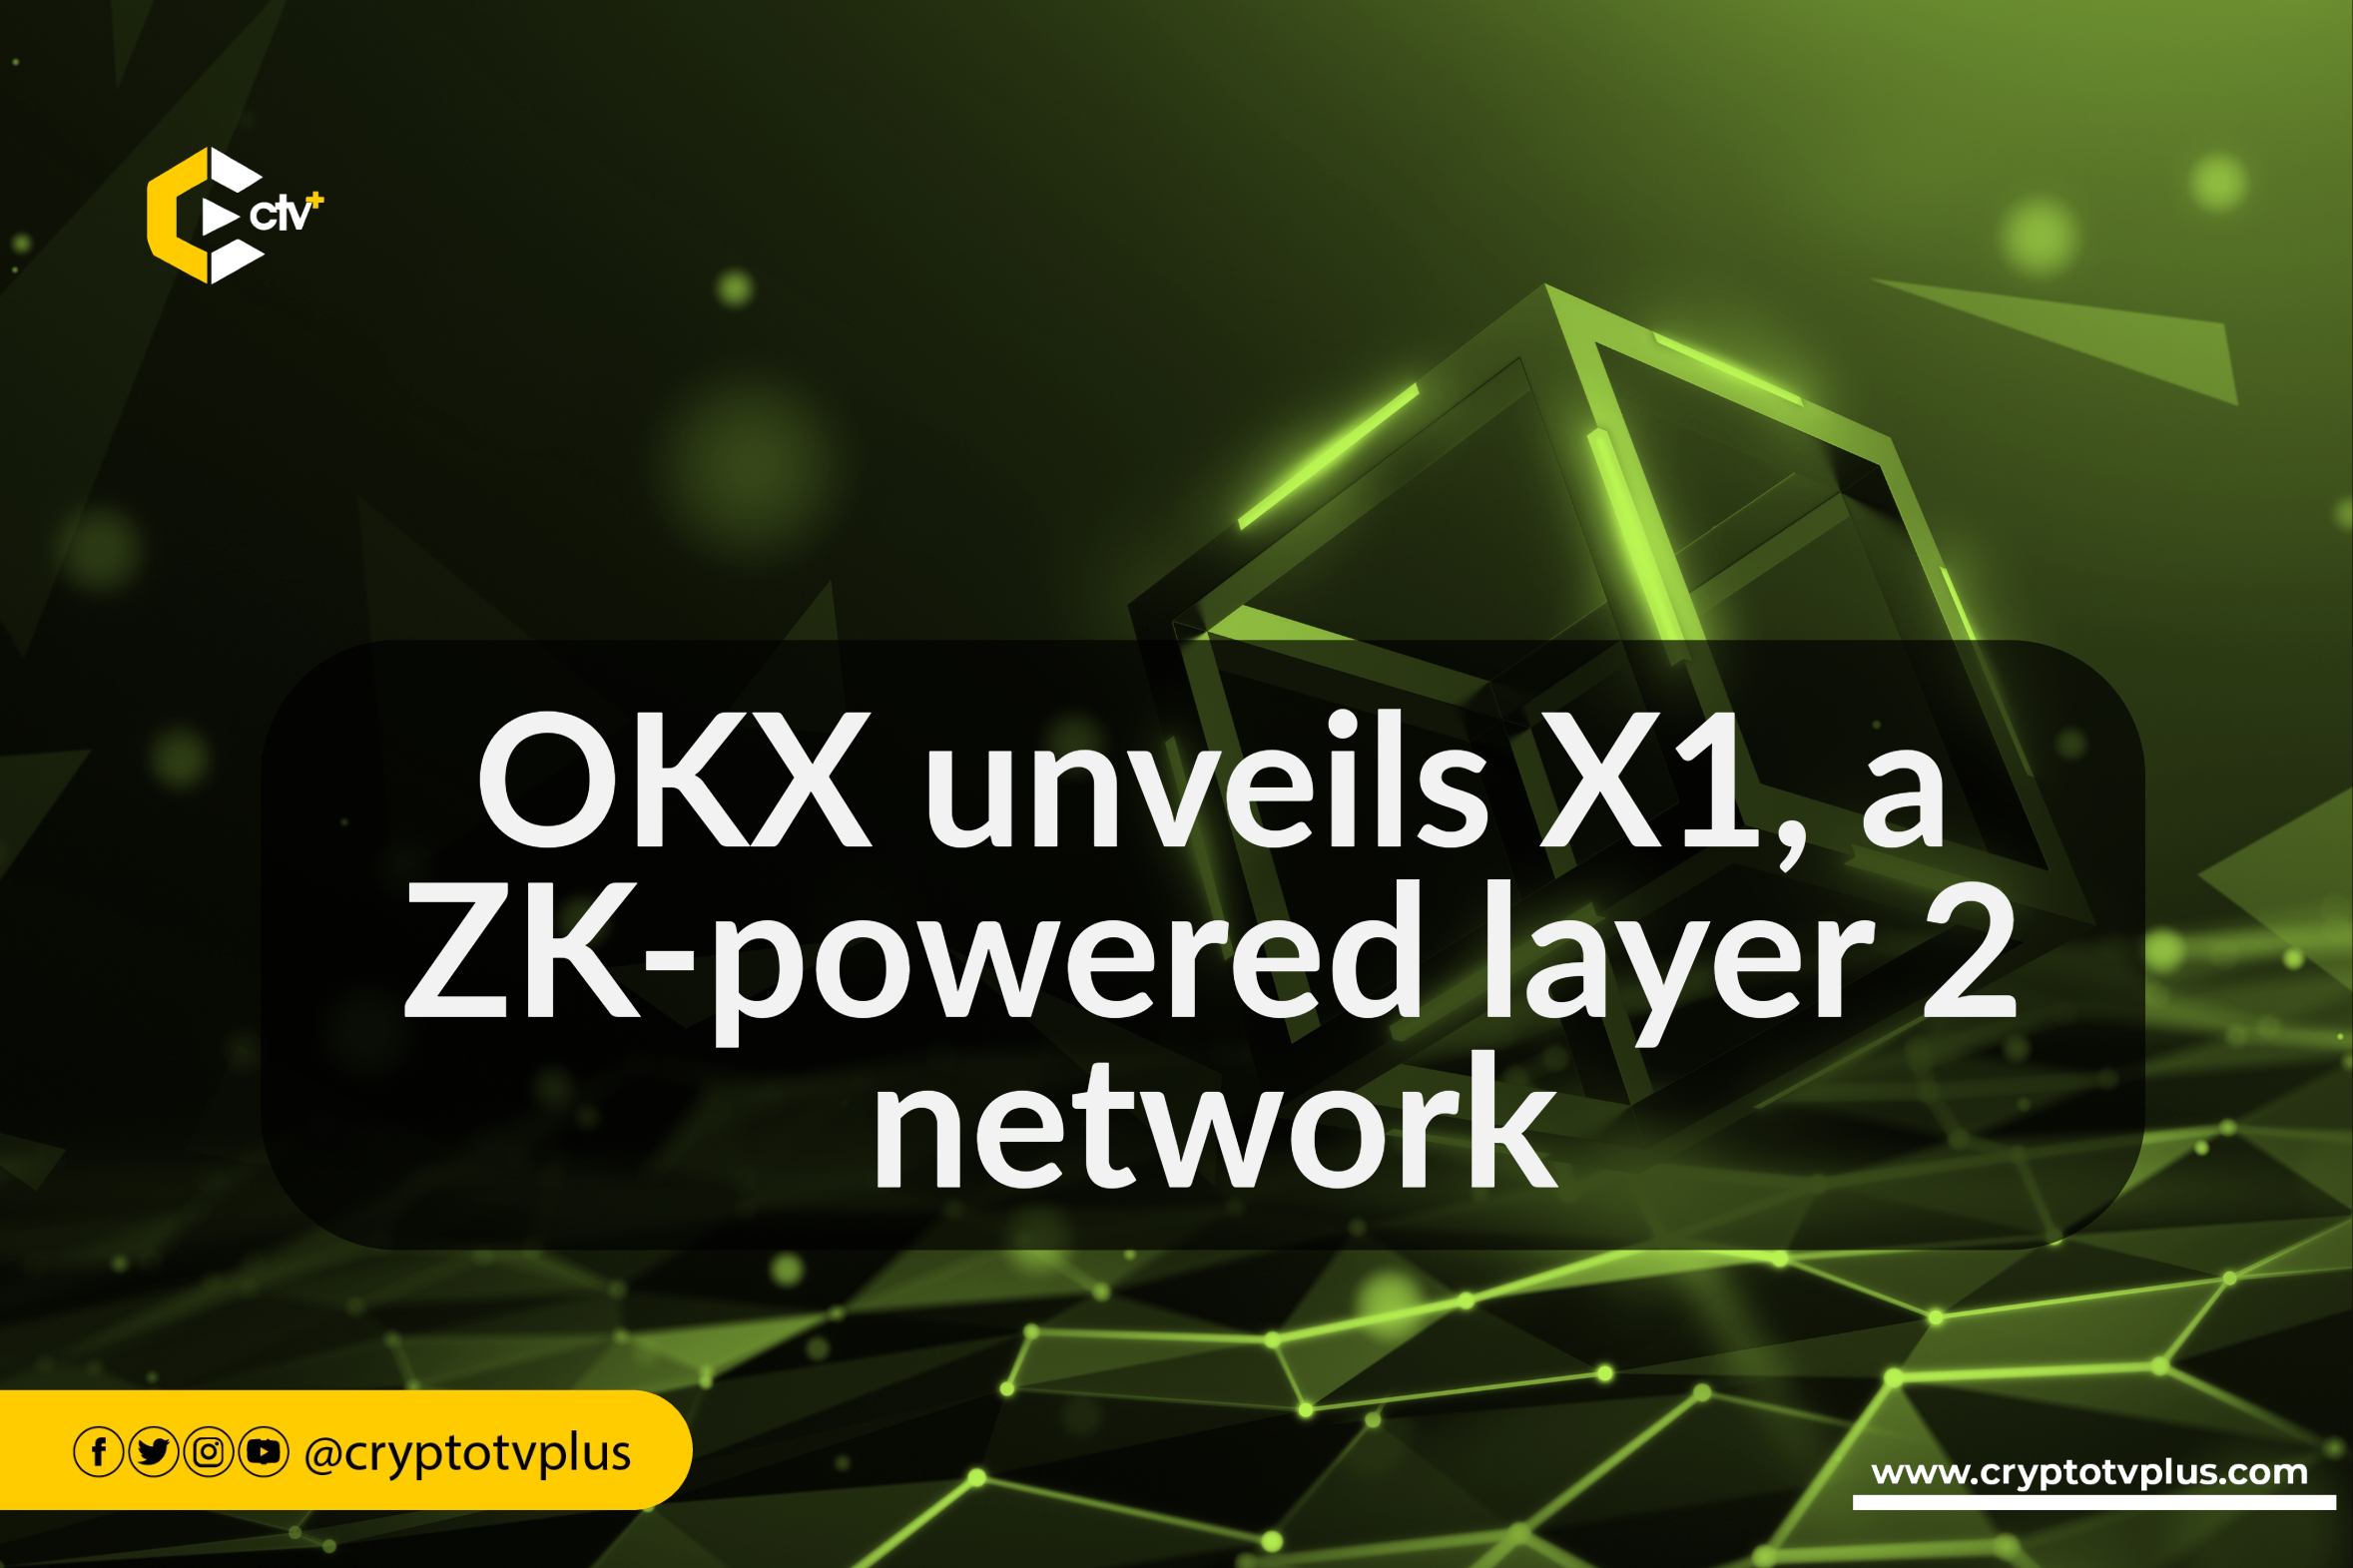 OKX unveils X1, a ZK-powered layer-2 network connecting OKX & Ethereum. Achieve near-instant finality, unified liquidity, and reduced gas costs. Enhance asset interoperability and deploy DApps easily with X1.